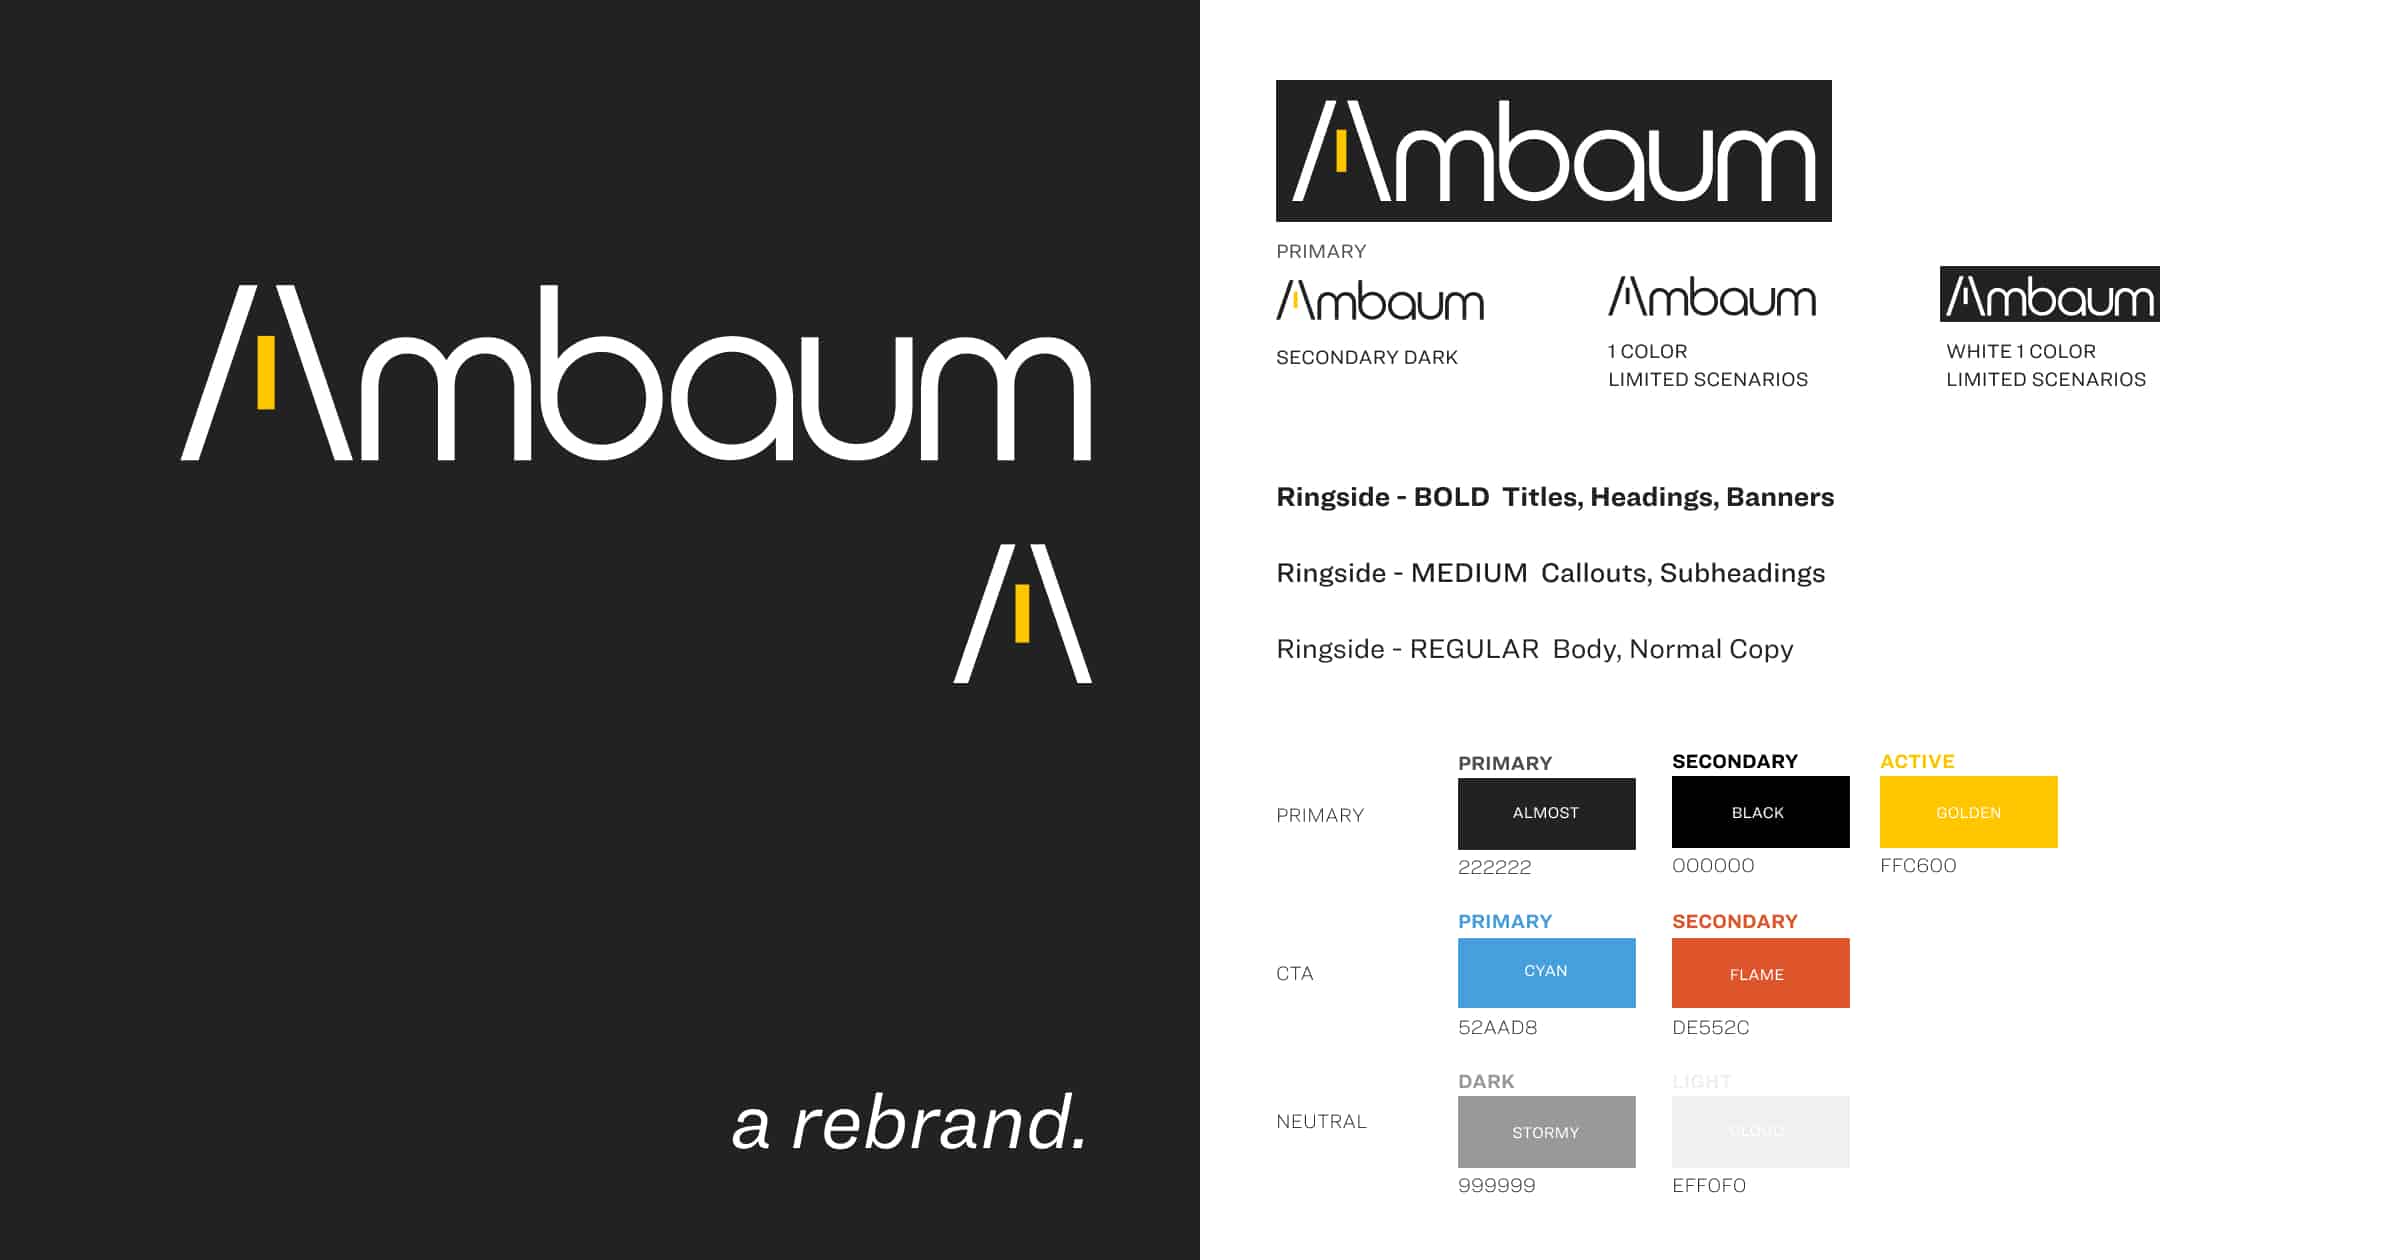 Behind the Scenes With the Ambaum Rebrand